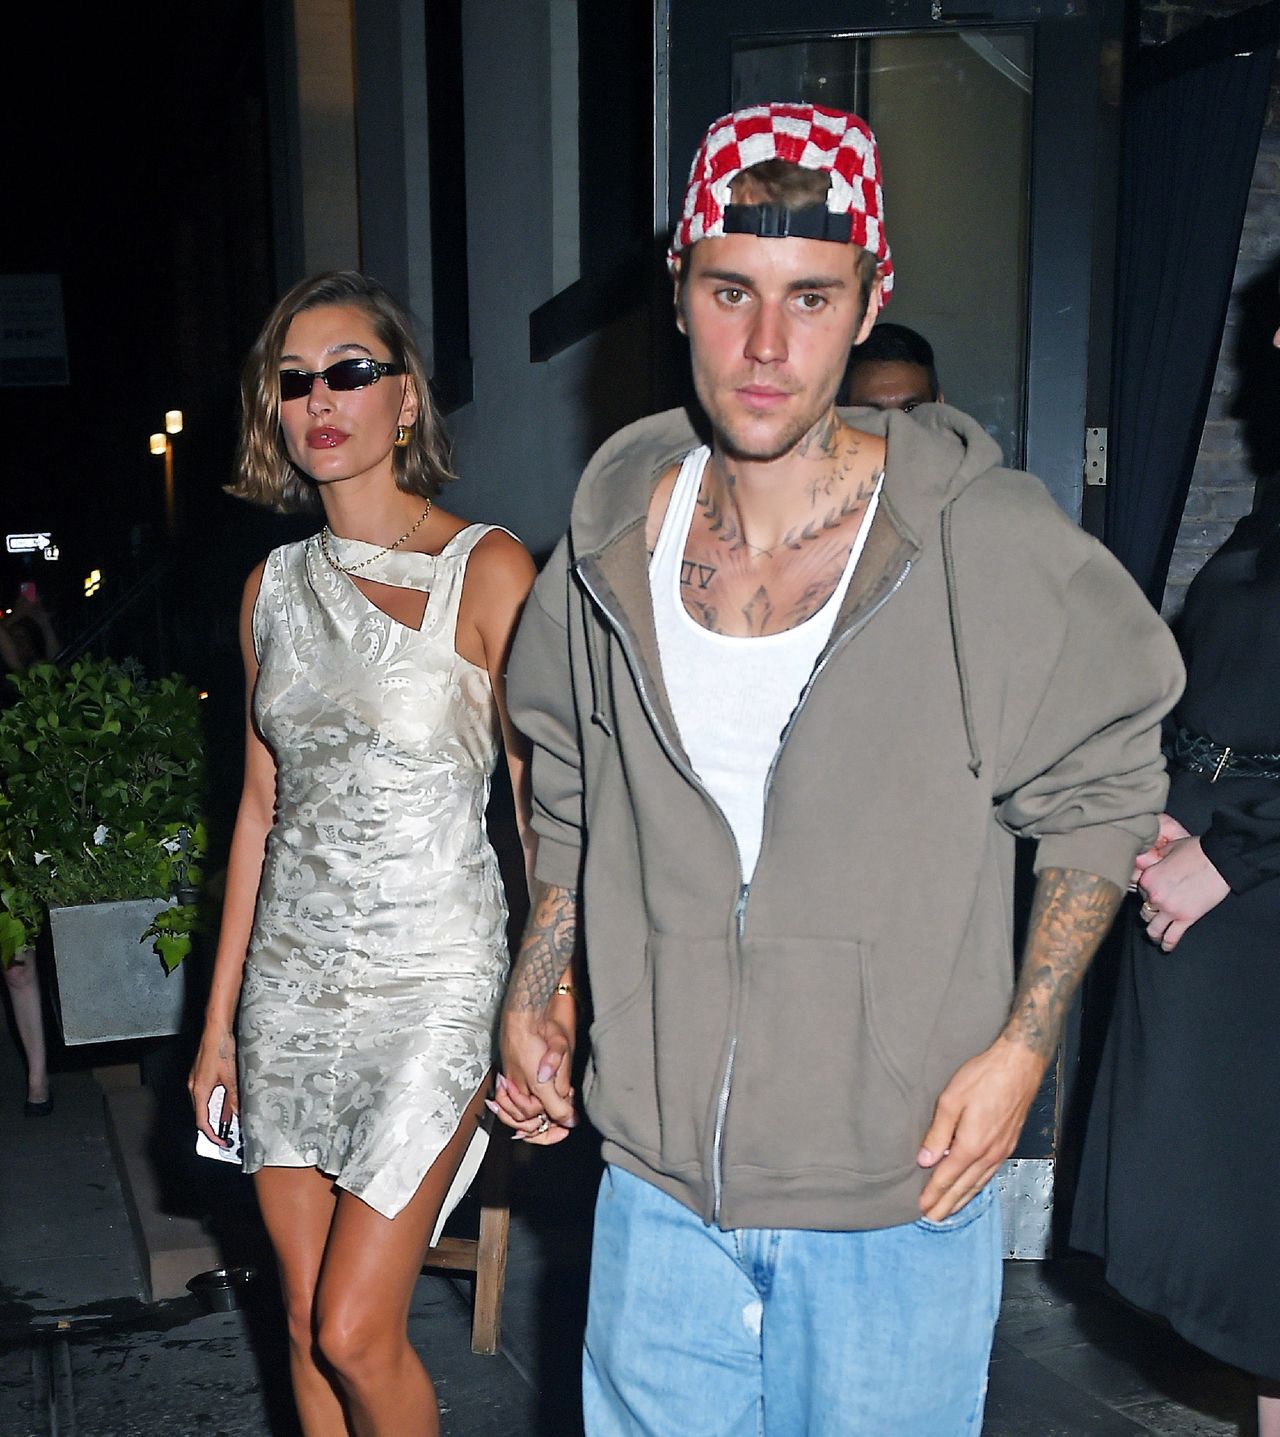 Hailey and Justin Biebers